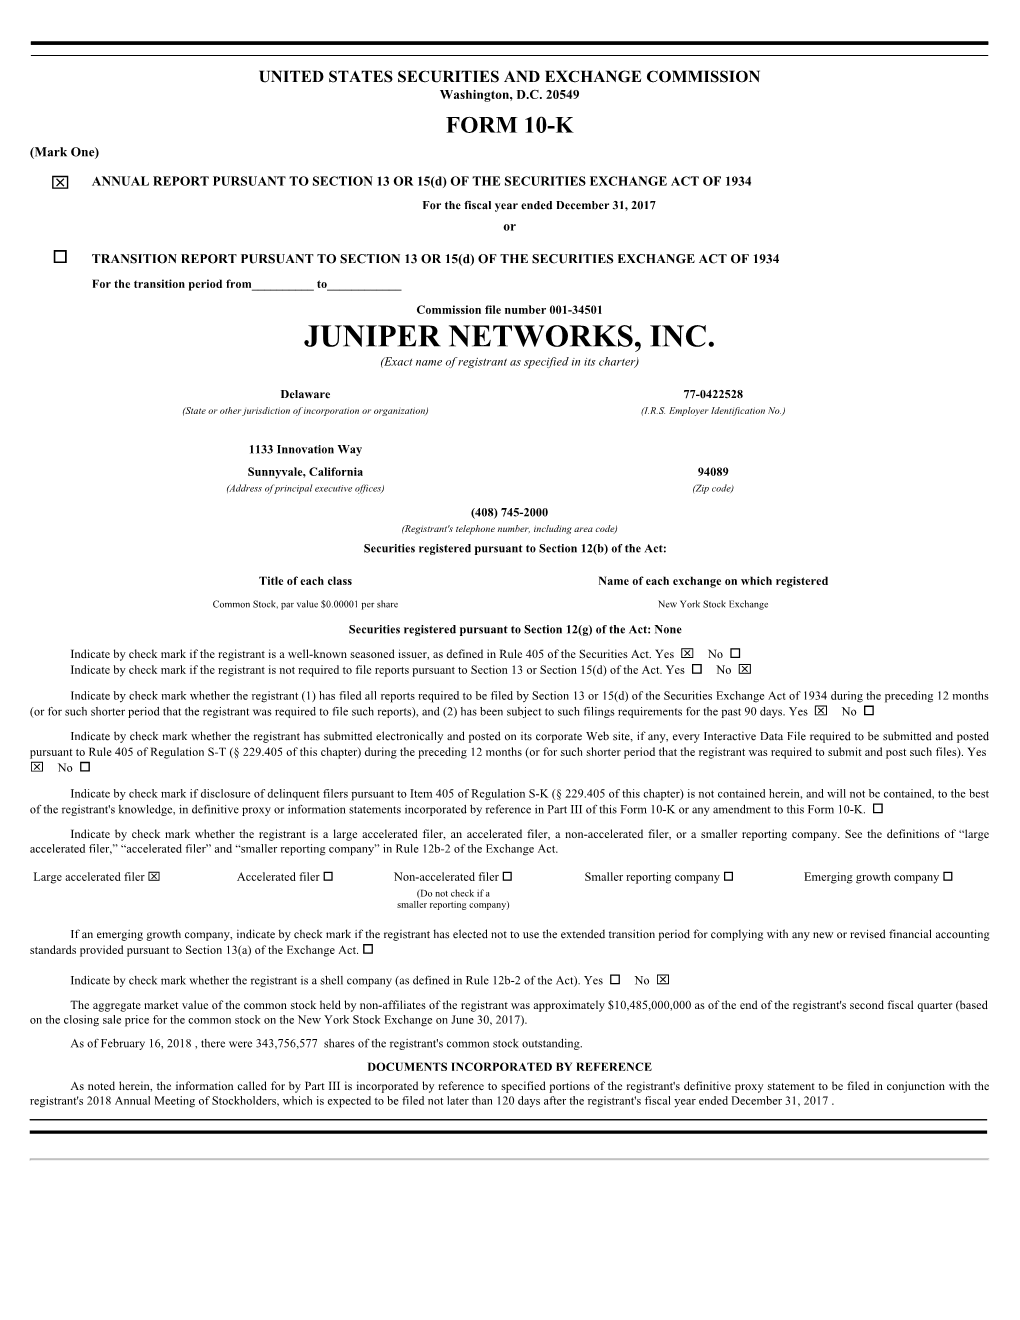 JUNIPER NETWORKS, INC. (Exact Name of Registrant As Specified in Its Charter)